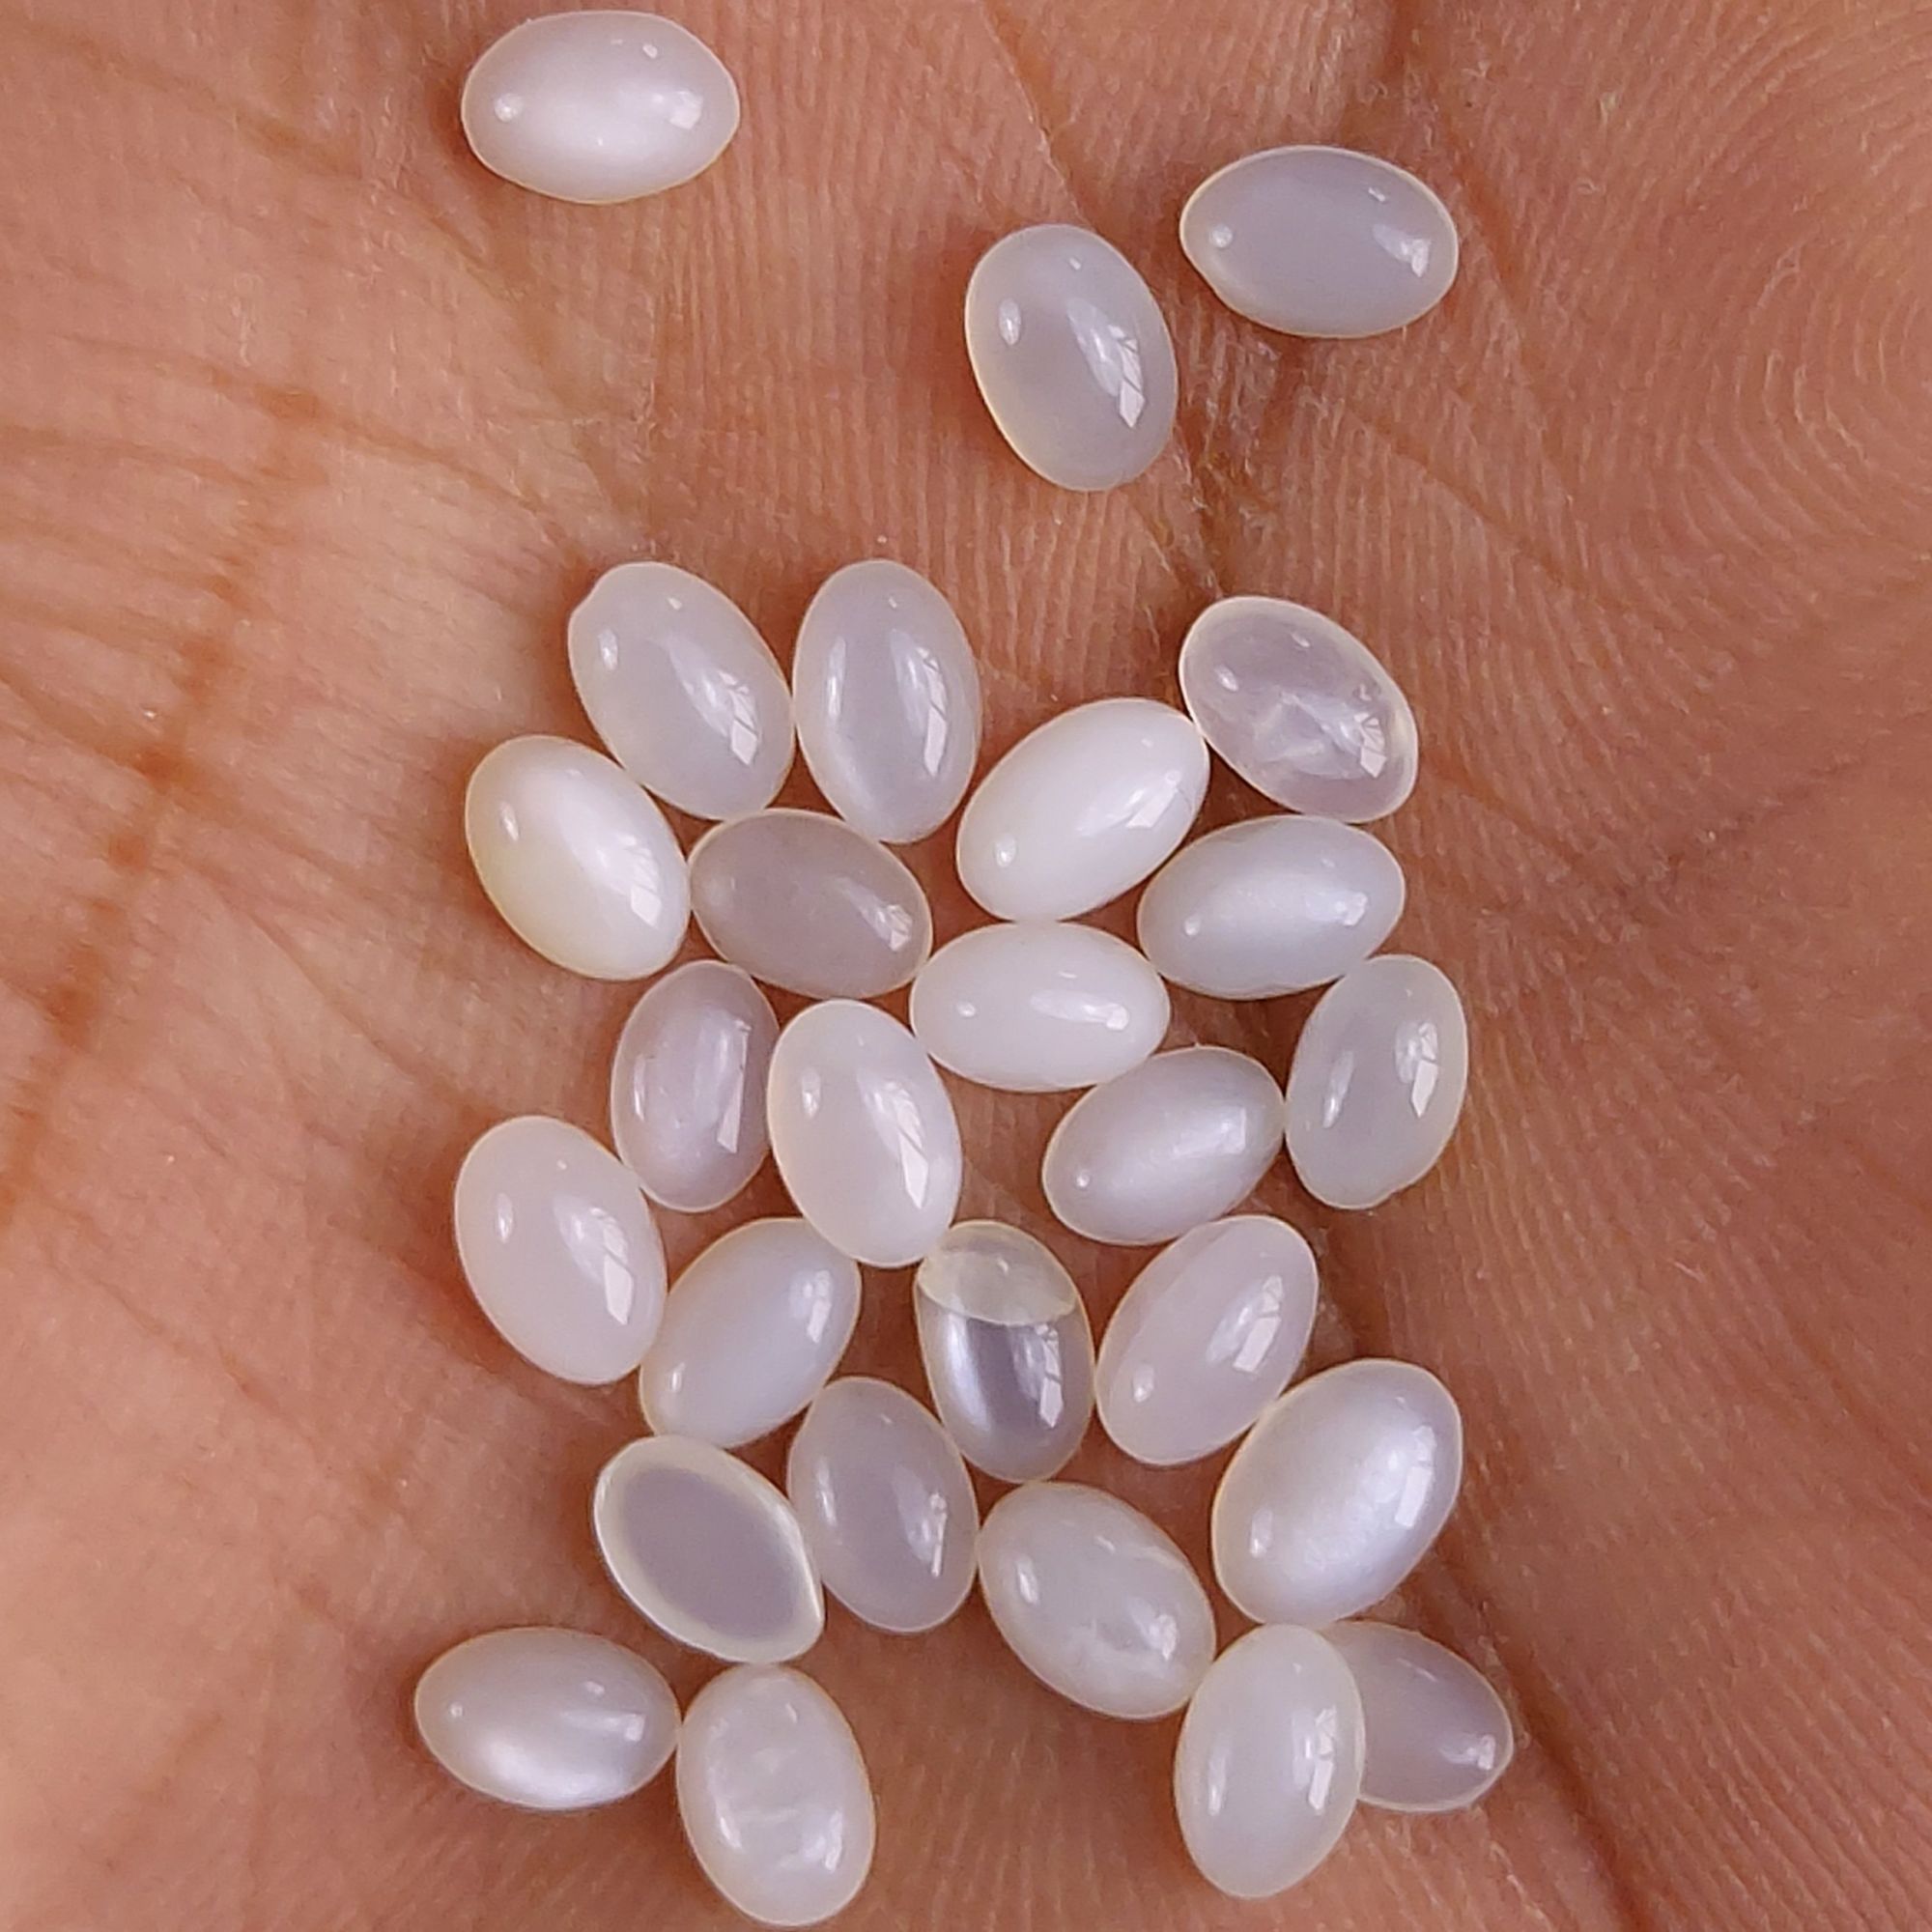 104Pcs 49Cts Natural White Moonstone Loose Cabochon Oval Shape Gemstone For Jewelry Making Lot 4x4mm#648